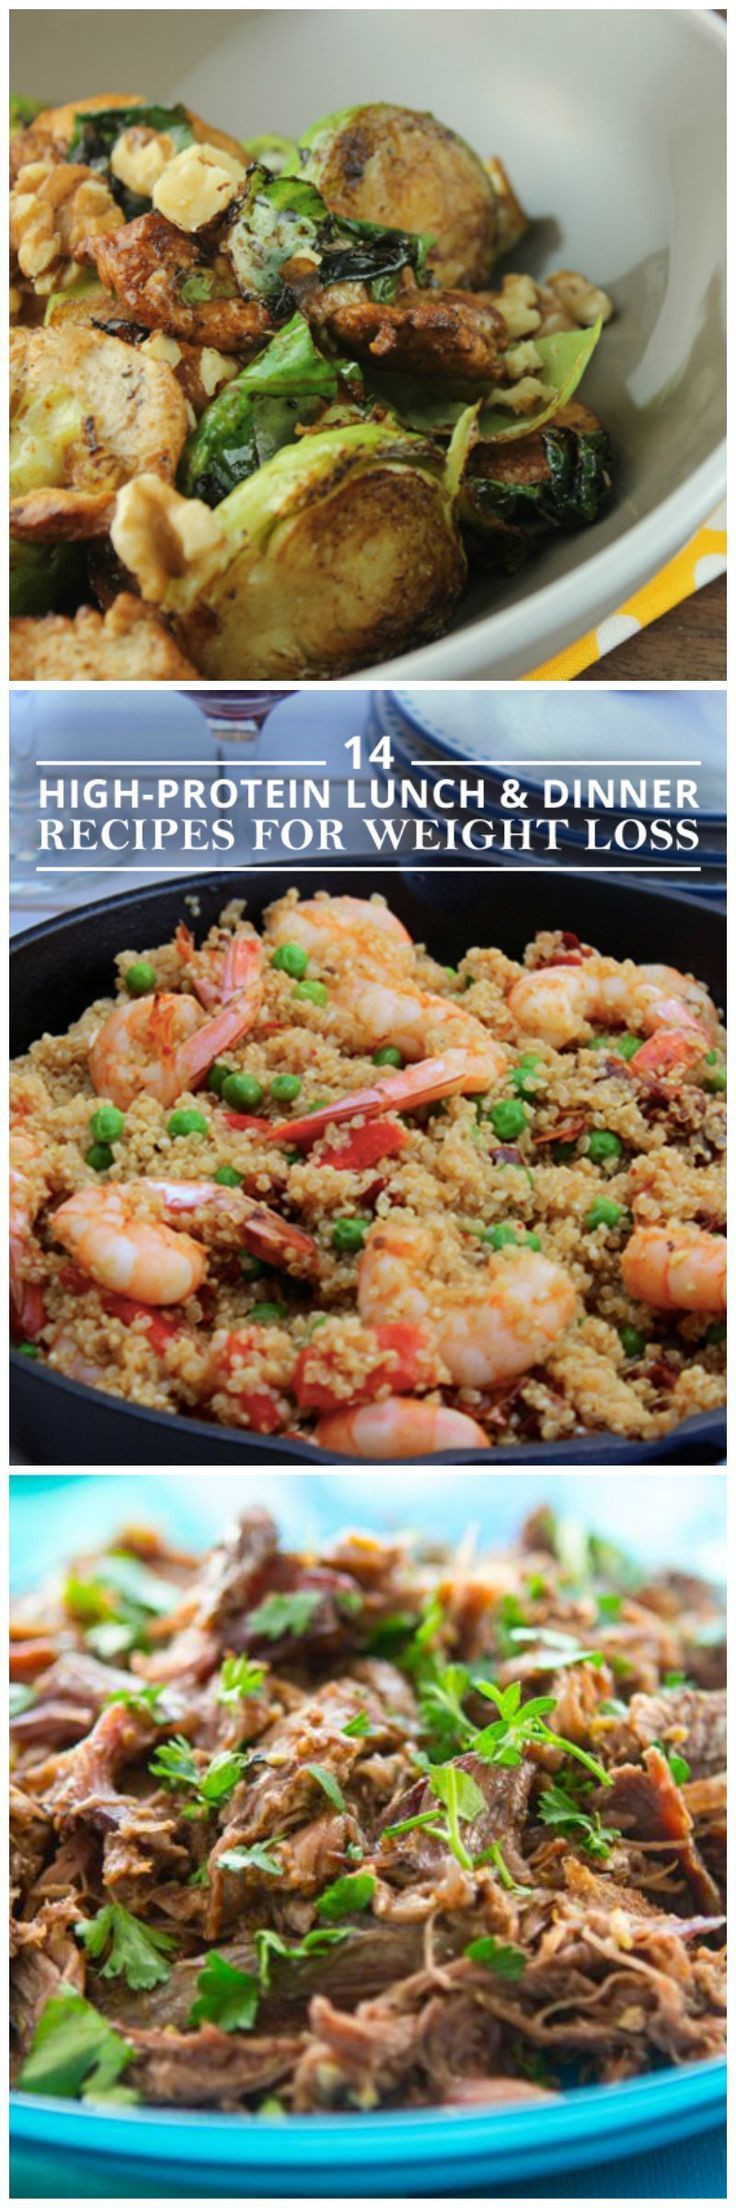 Low Carb Recipes For Weight Loss
 97 best images about High Protein Low Carb Recipes on